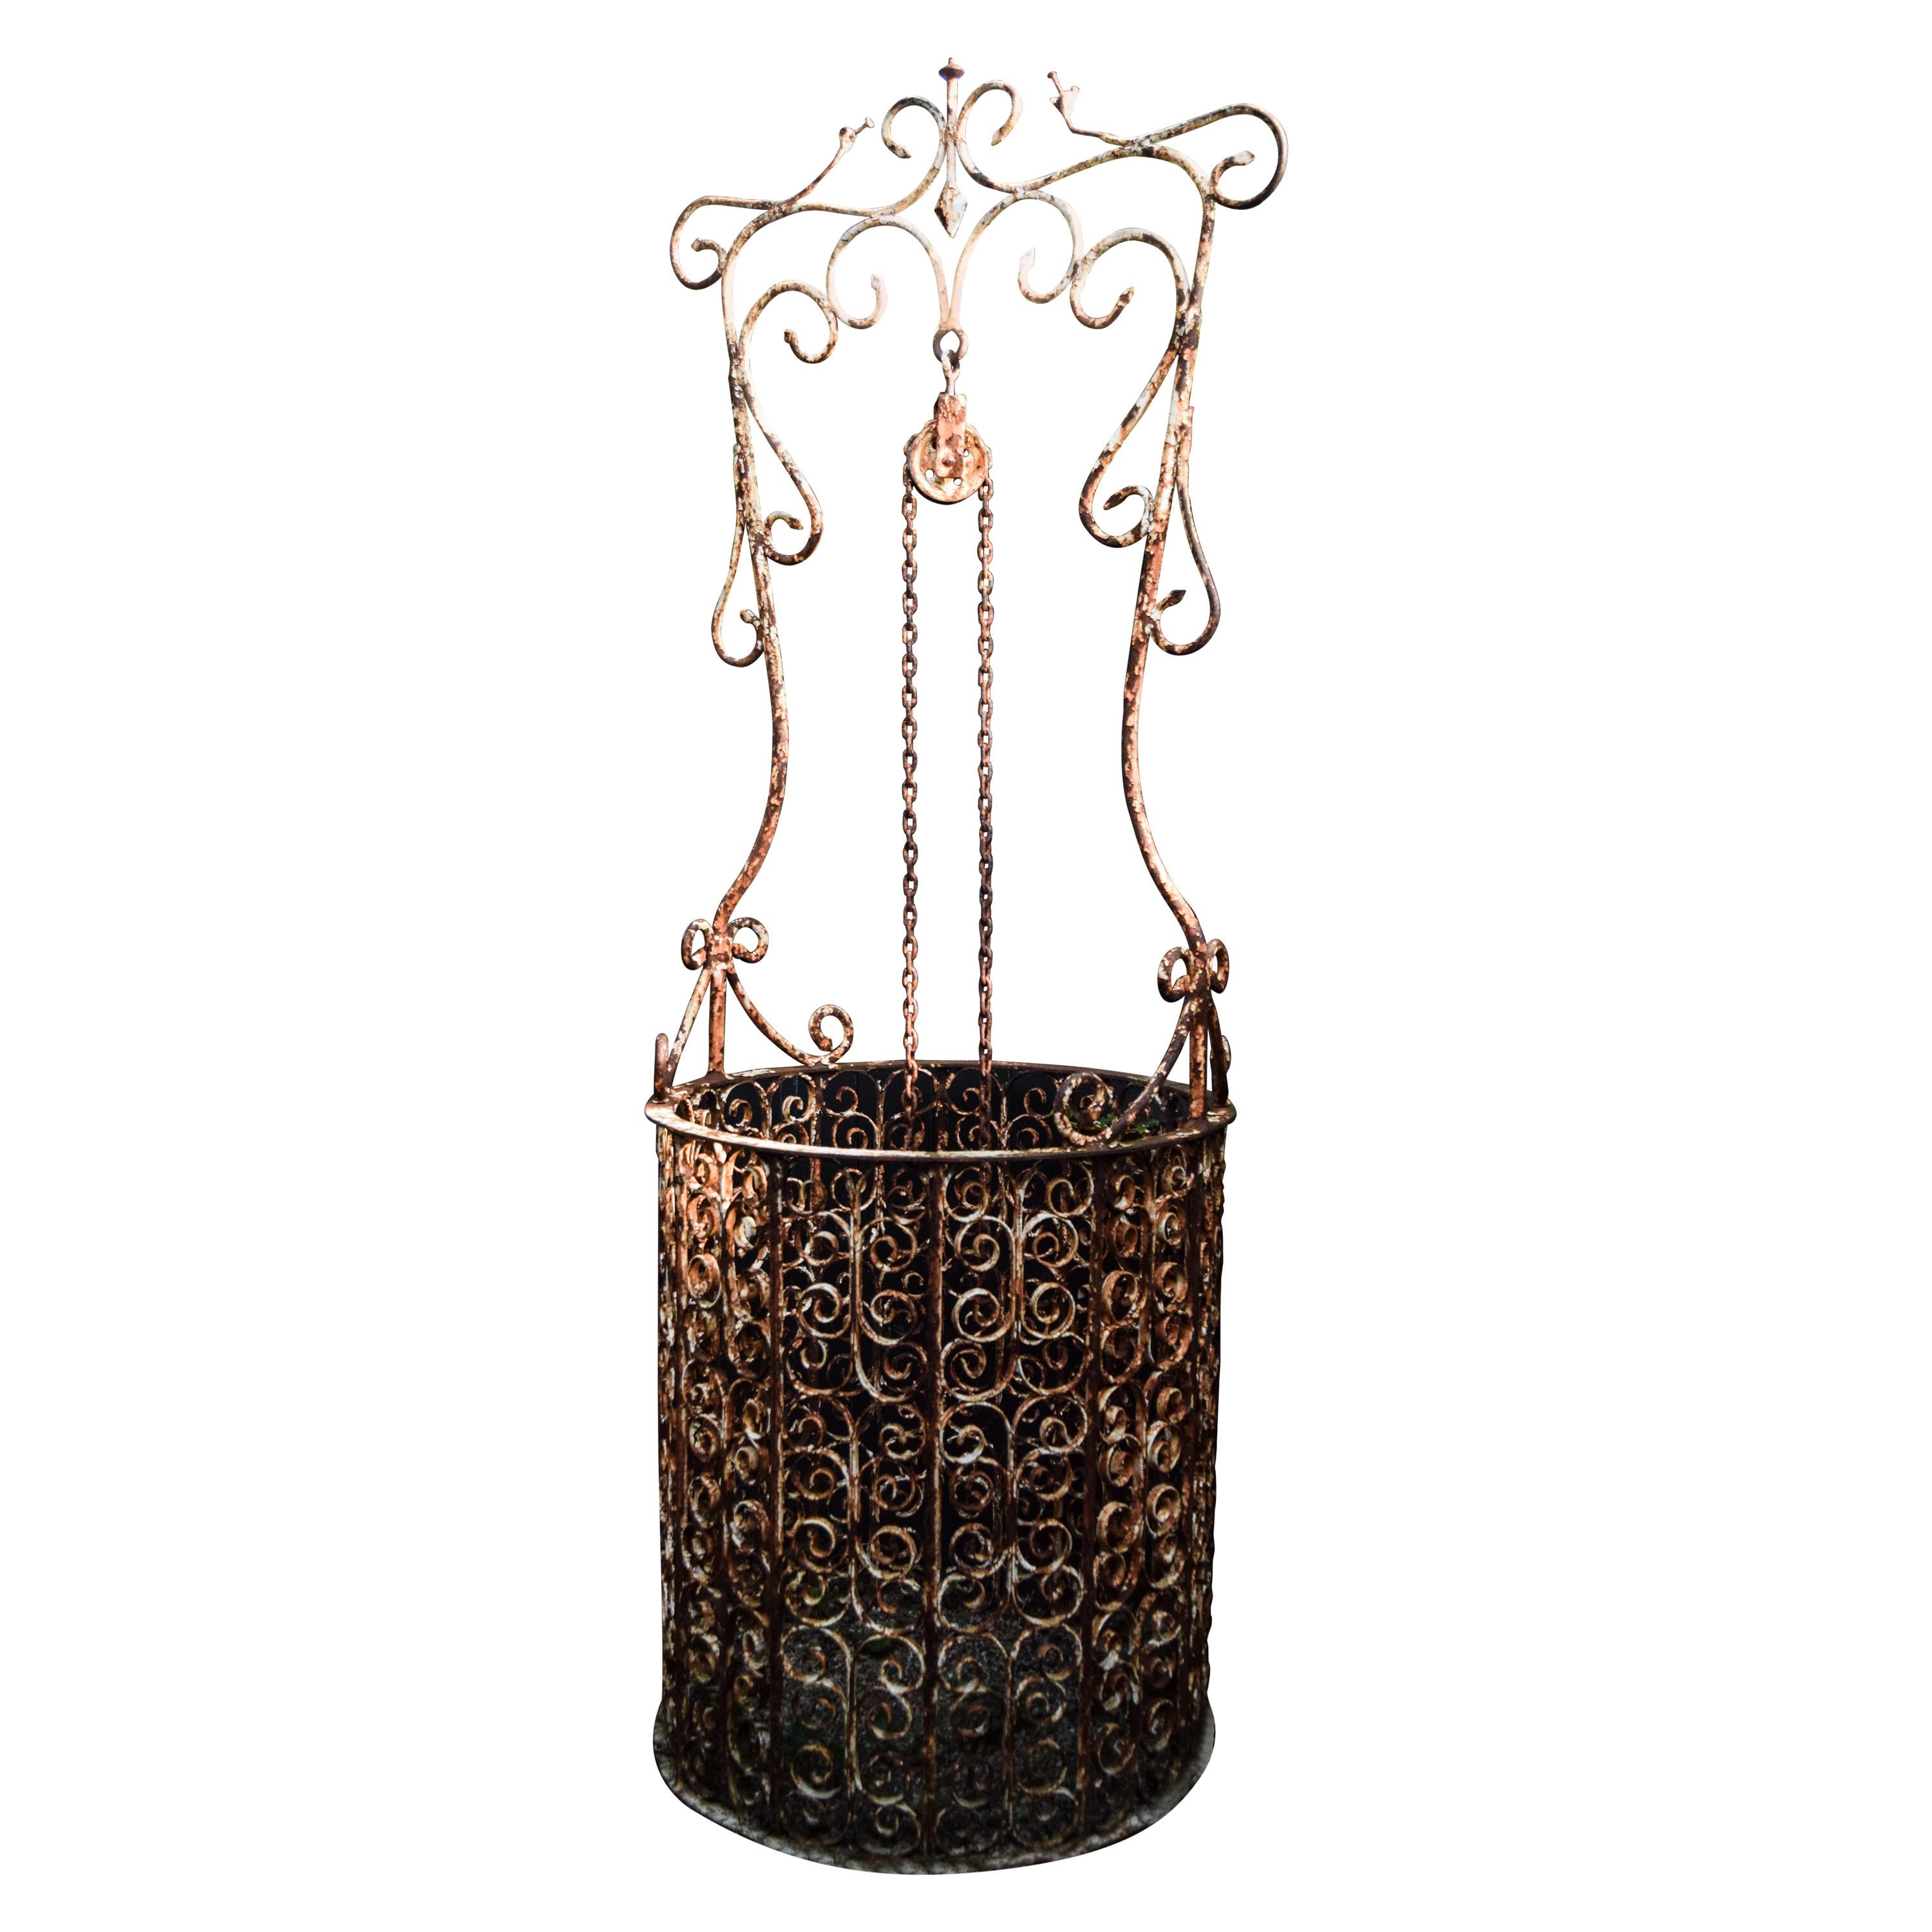 Wrought Iron Decorative Well Head For Sale